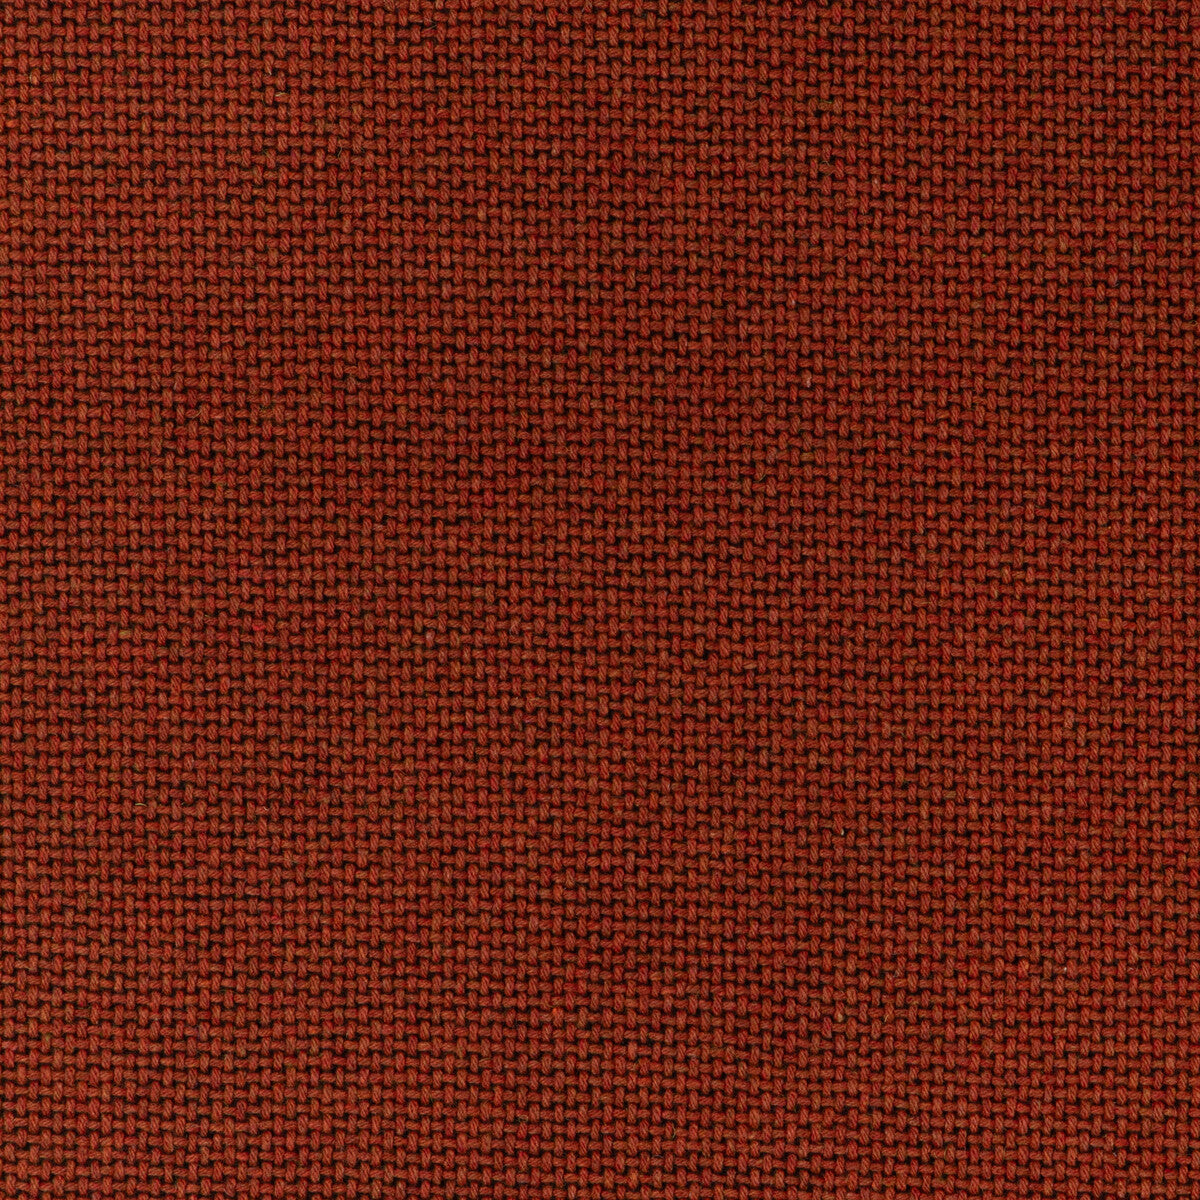 Easton Wool fabric in cinnamon color - pattern 37027.624.0 - by Kravet Contract